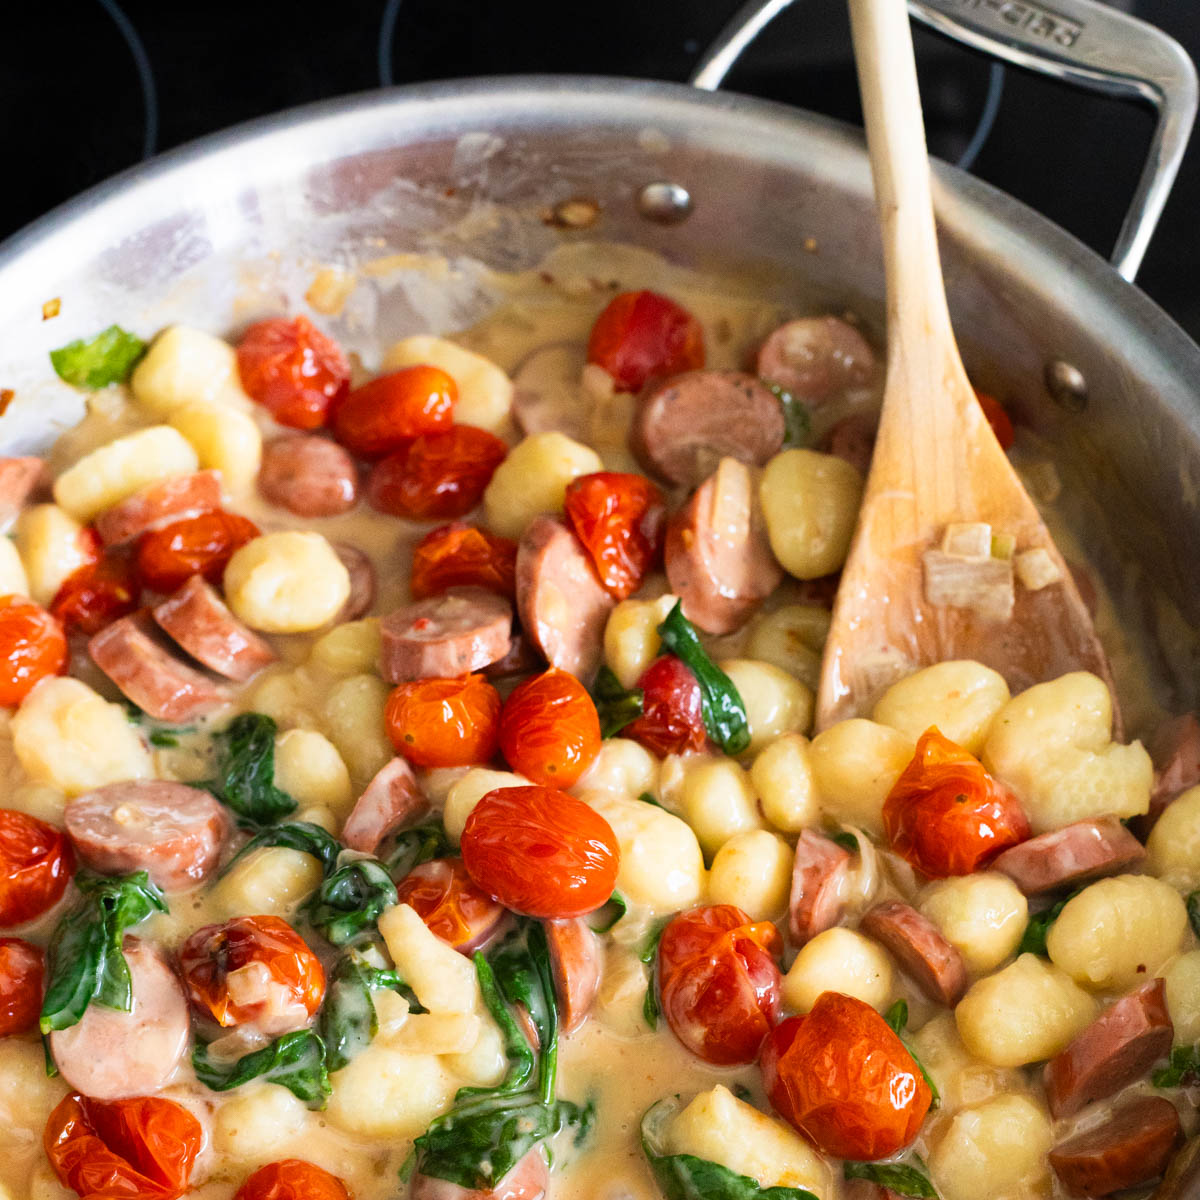 A skillet is filled with the creamy sauce coated gnocchi with roasted cherry tomatoes and wilted baby spinach.